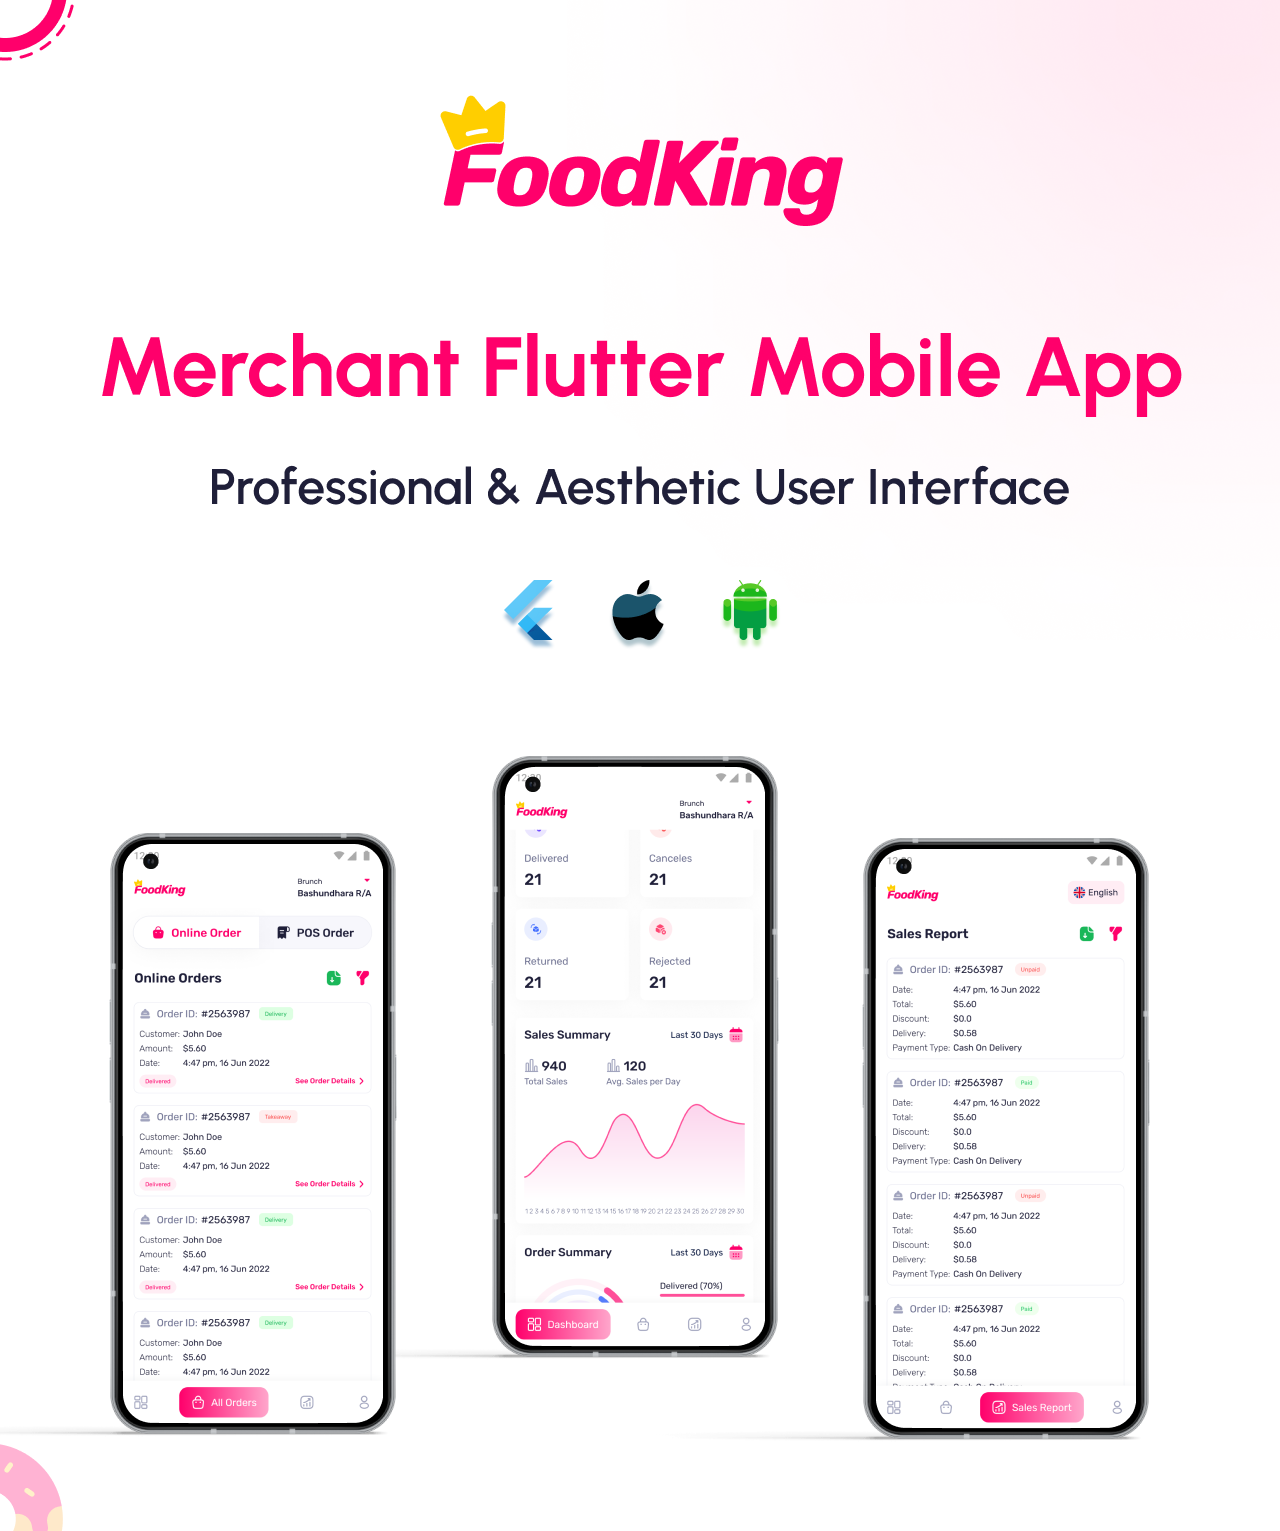 What's included with the FoodKing admin app or merchant app or restaurant app?